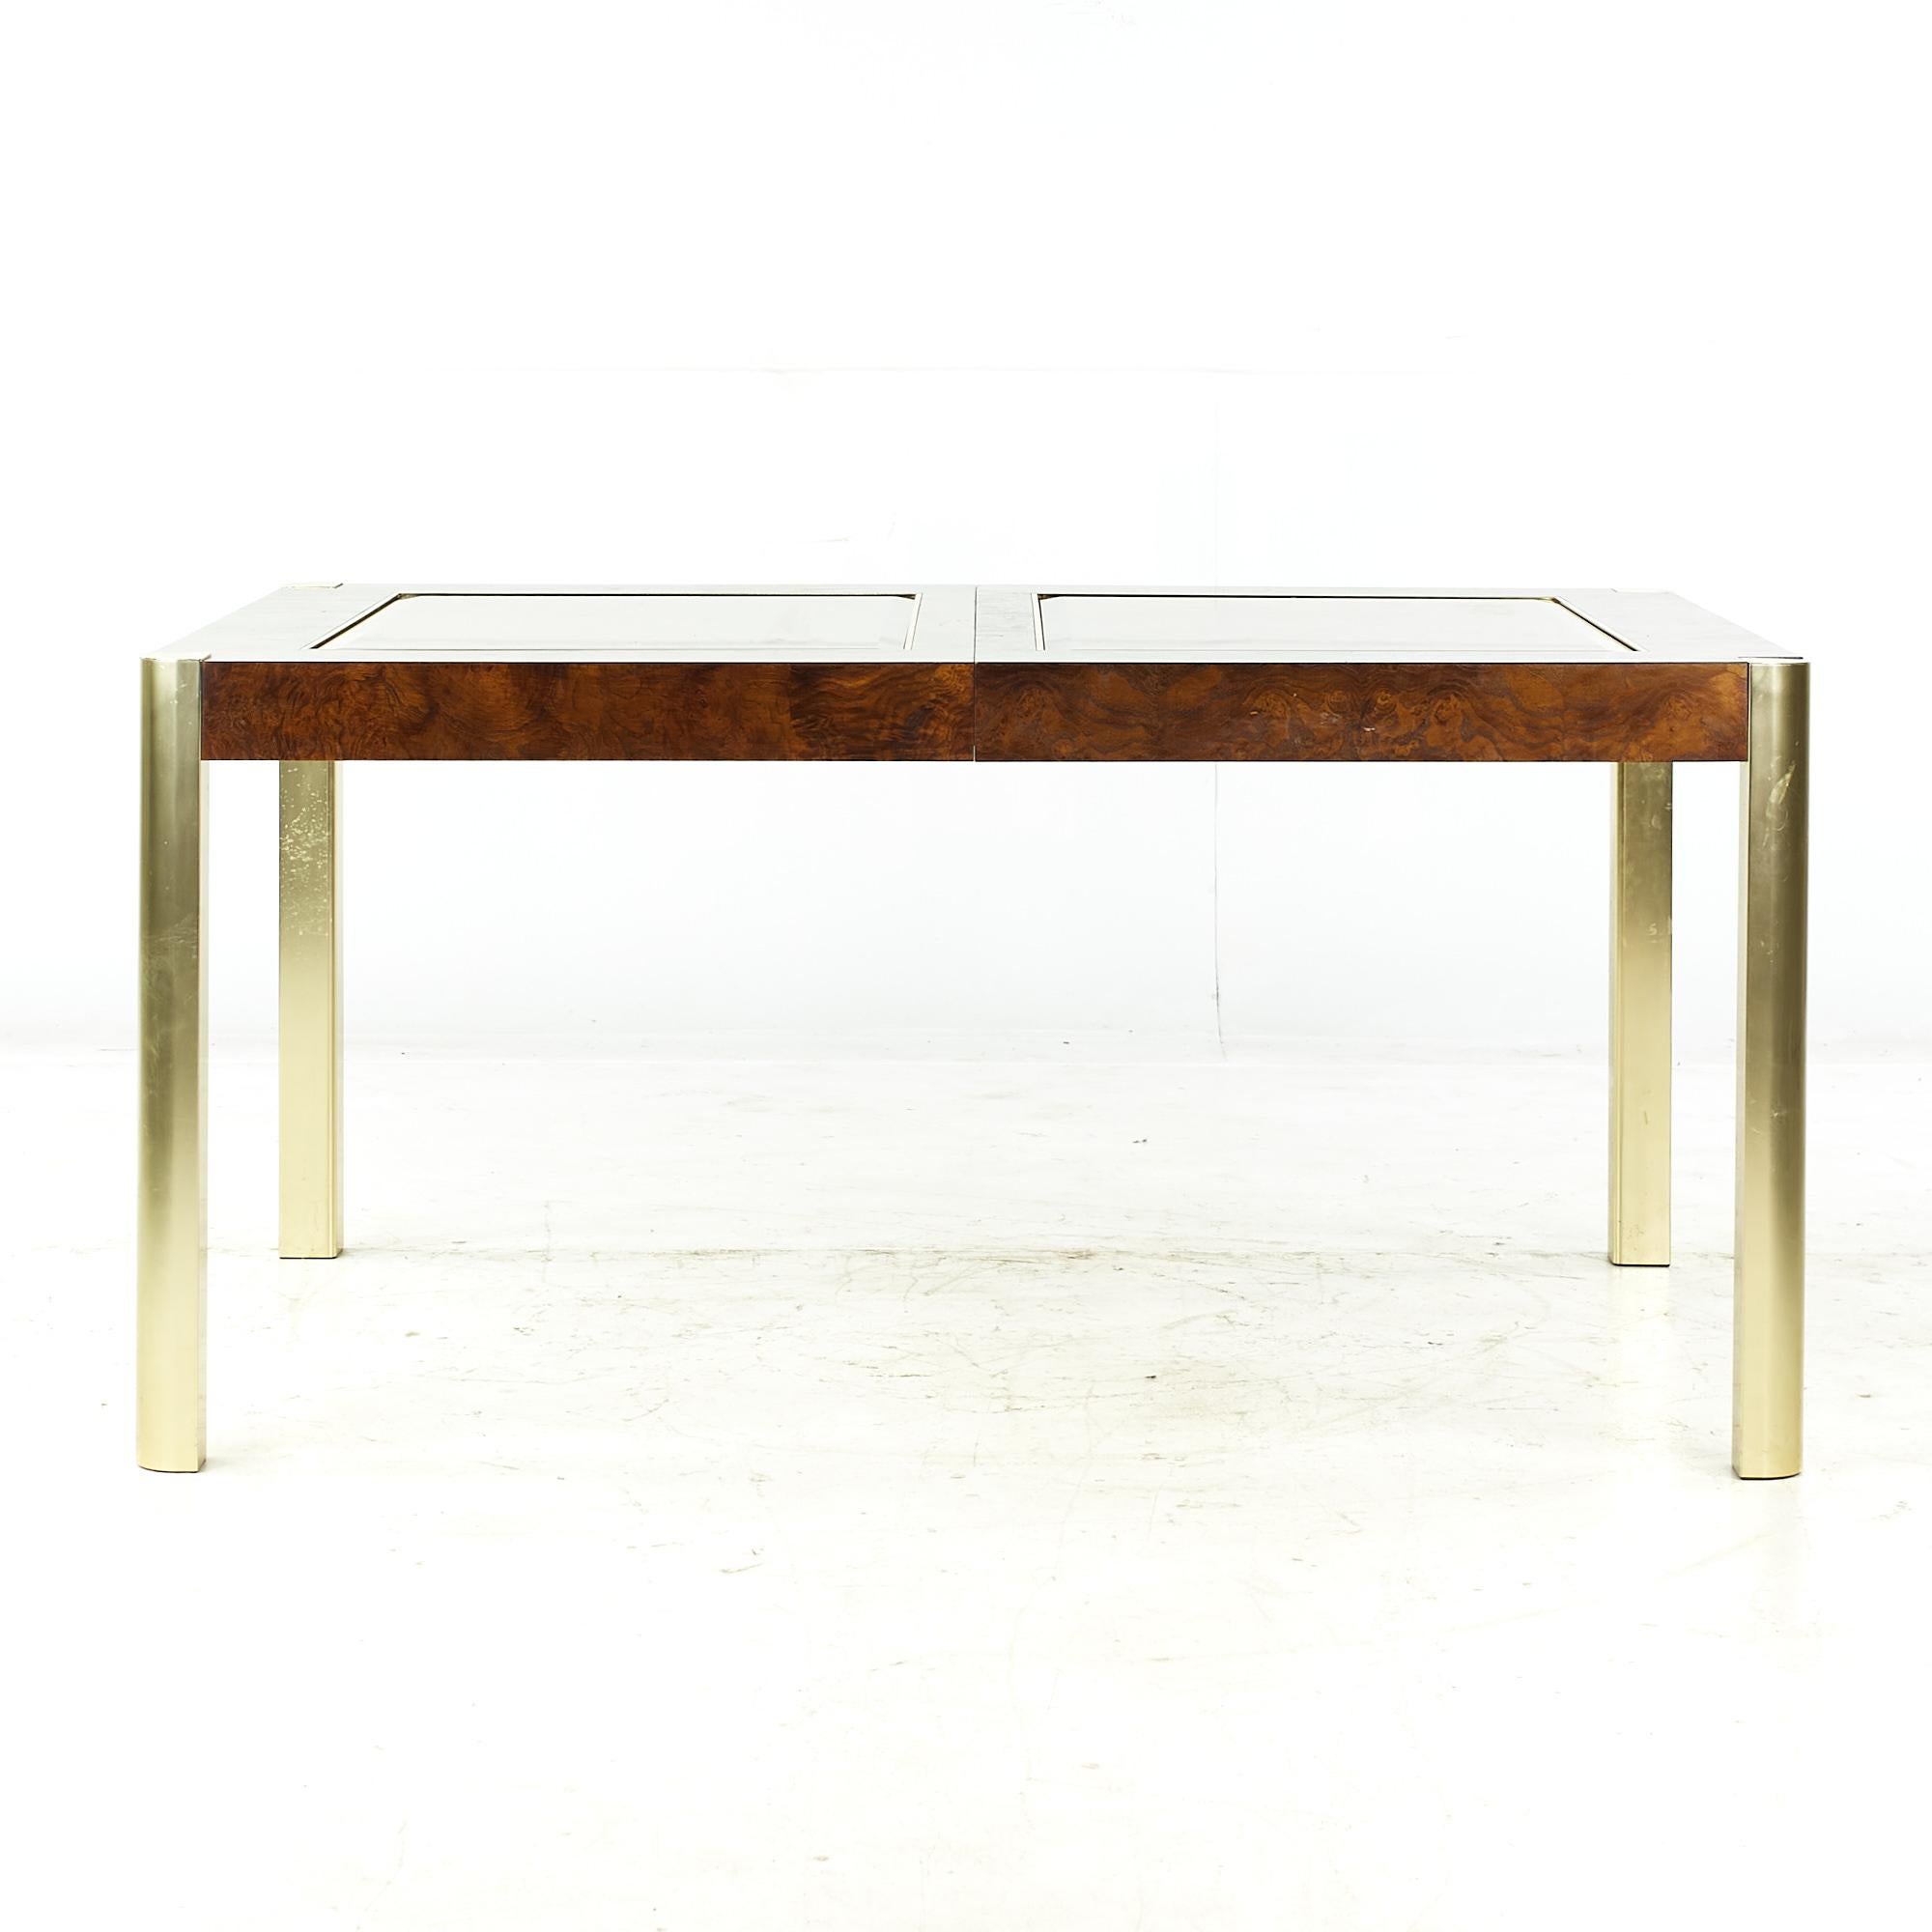 Century mid-century burlwood brass and glass dining table.

This table measures: 60 wide x 40 deep x 29 high, with a chair clearance of 25.5 inches, each leaf measures 18 inches wide, making a maximum table width of 96 inches when both leaves are